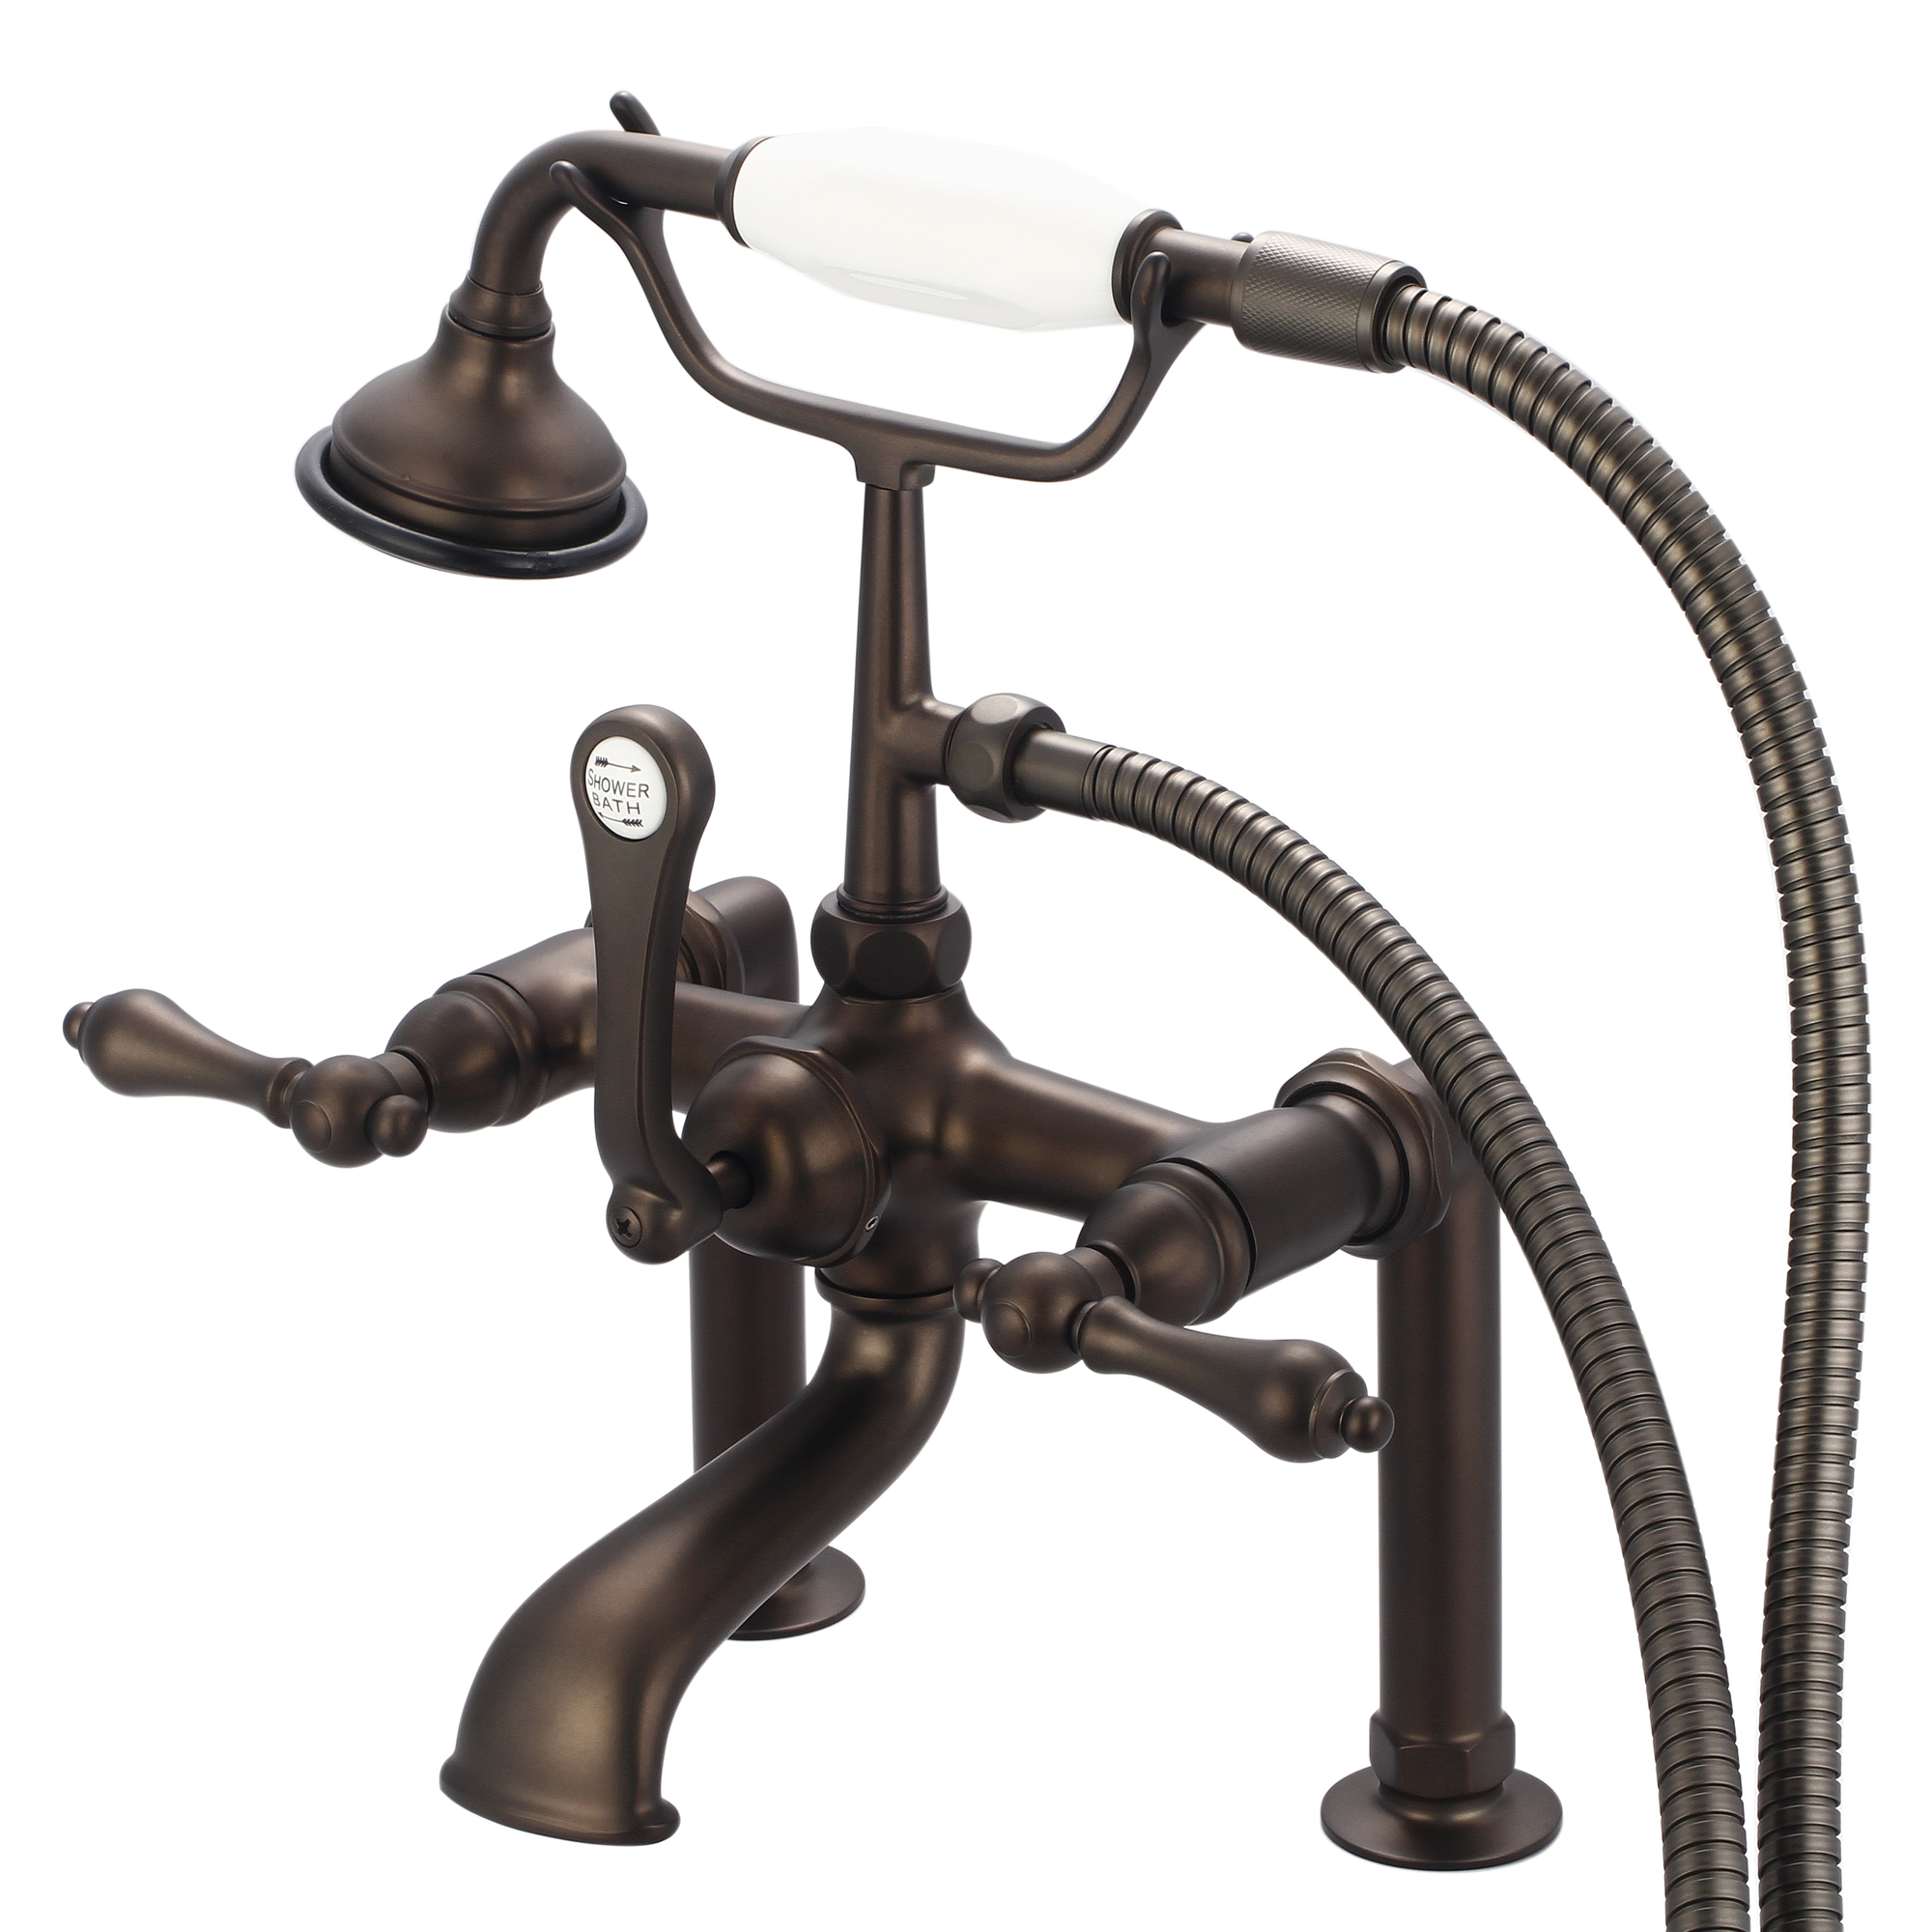 Vintage Classic 7 Inch Spread Deck Mount Tub Faucet With 6 Inch Risers & Handheld Shower in Oil-rubbed Bronze Finish Finish With Metal Lever Handles Without Labels